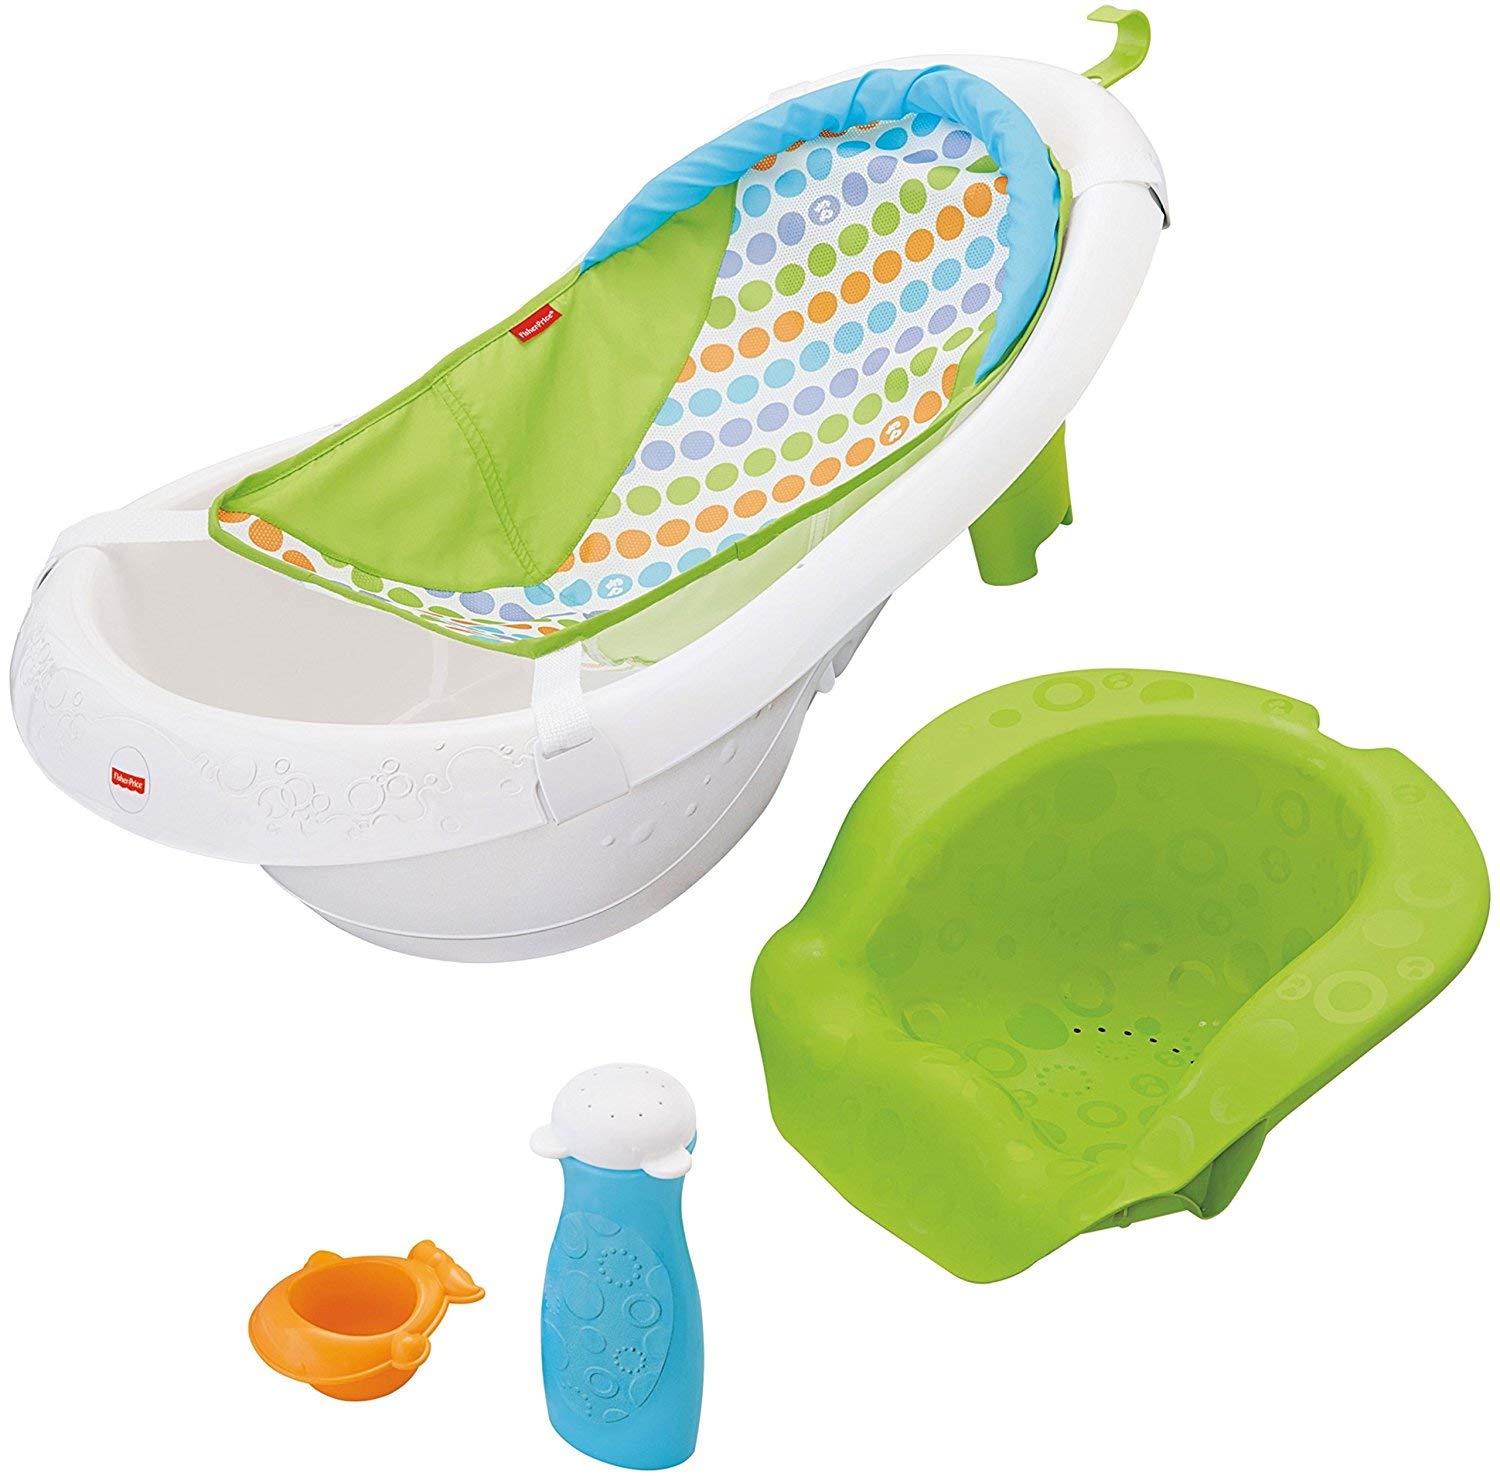 Top 7 Best Infant Tubs For Newborn Reviews in 2023 4